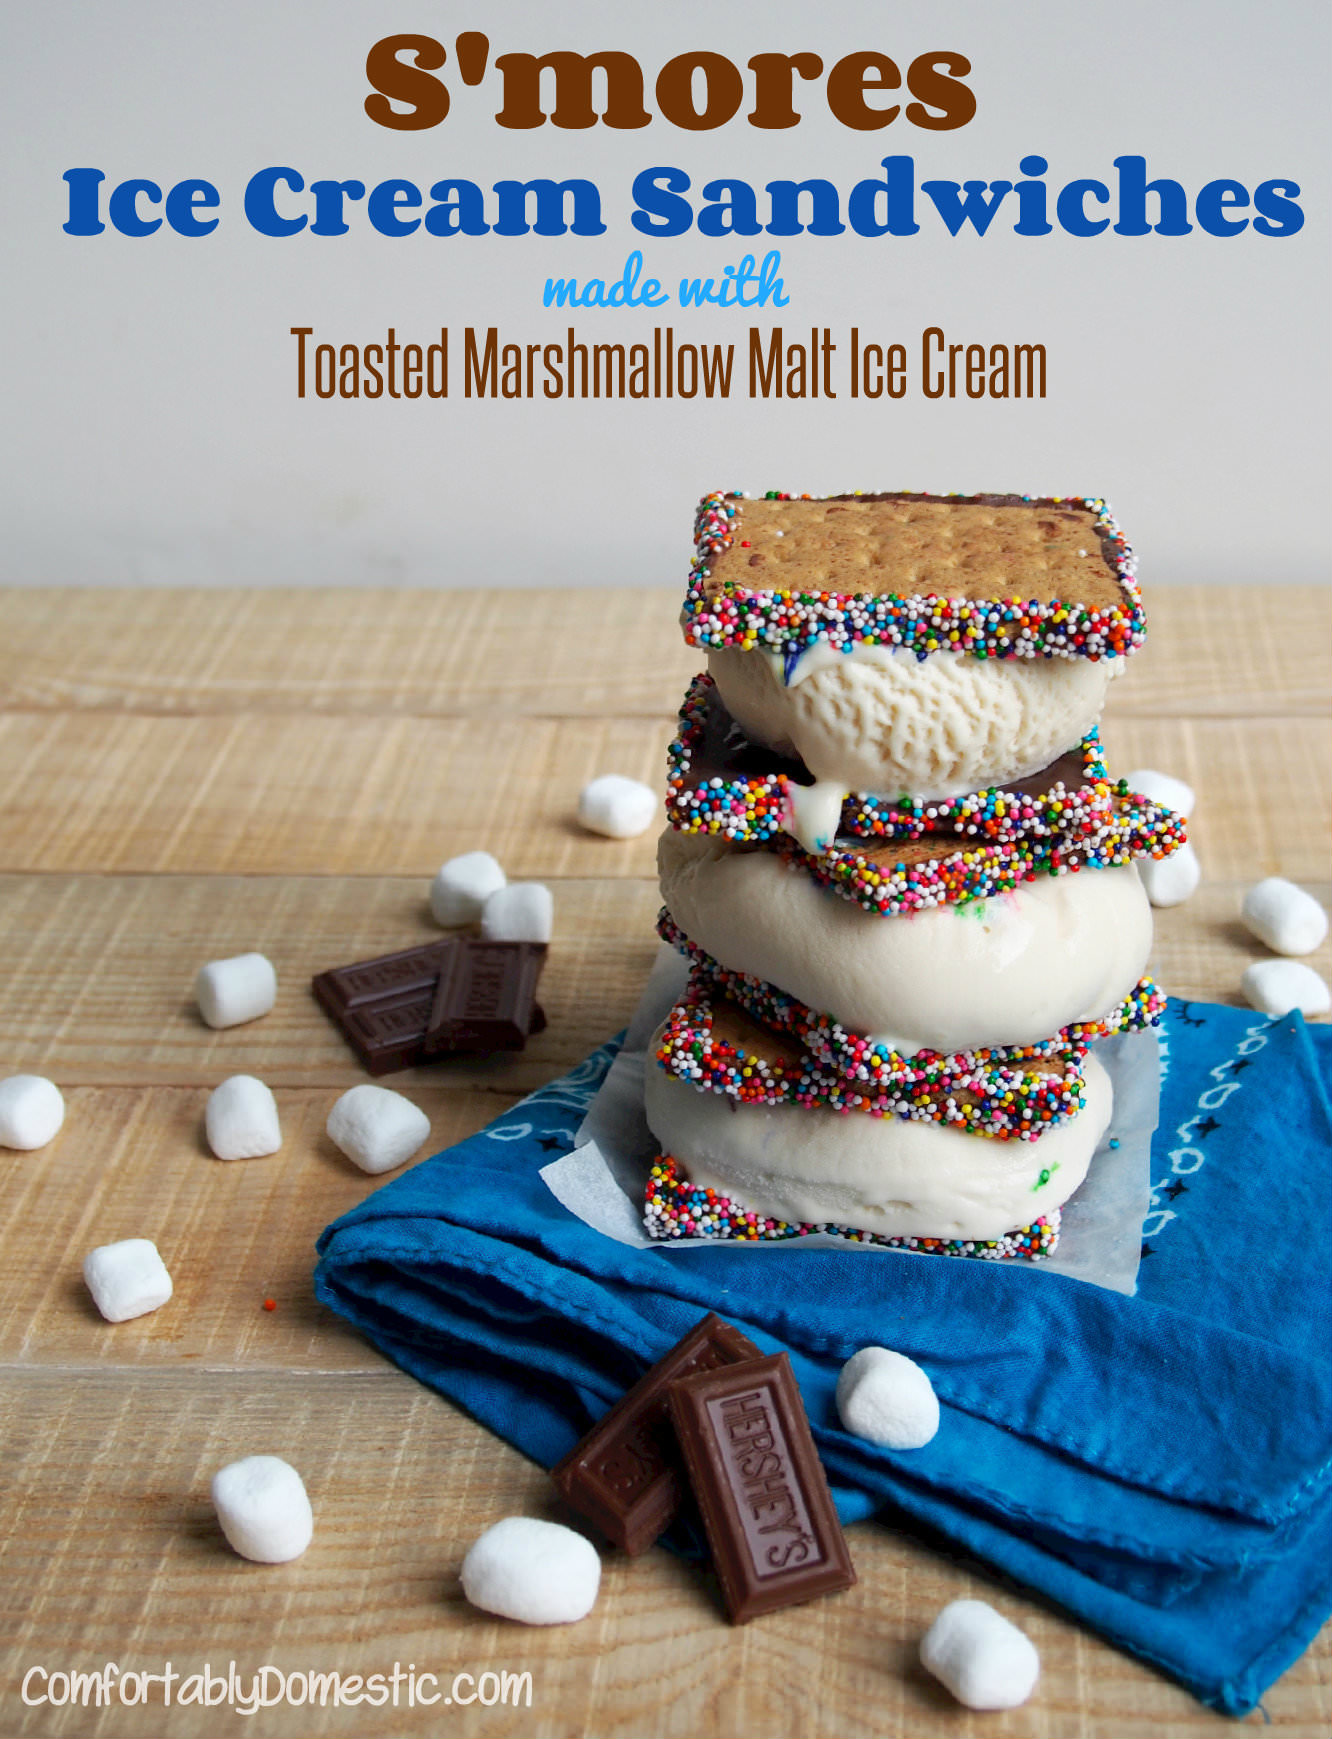 S'mores Ice Cream Sandwiches with Toasted Marshmallow Malt Ice Cream | ComfortablyDomestic.com